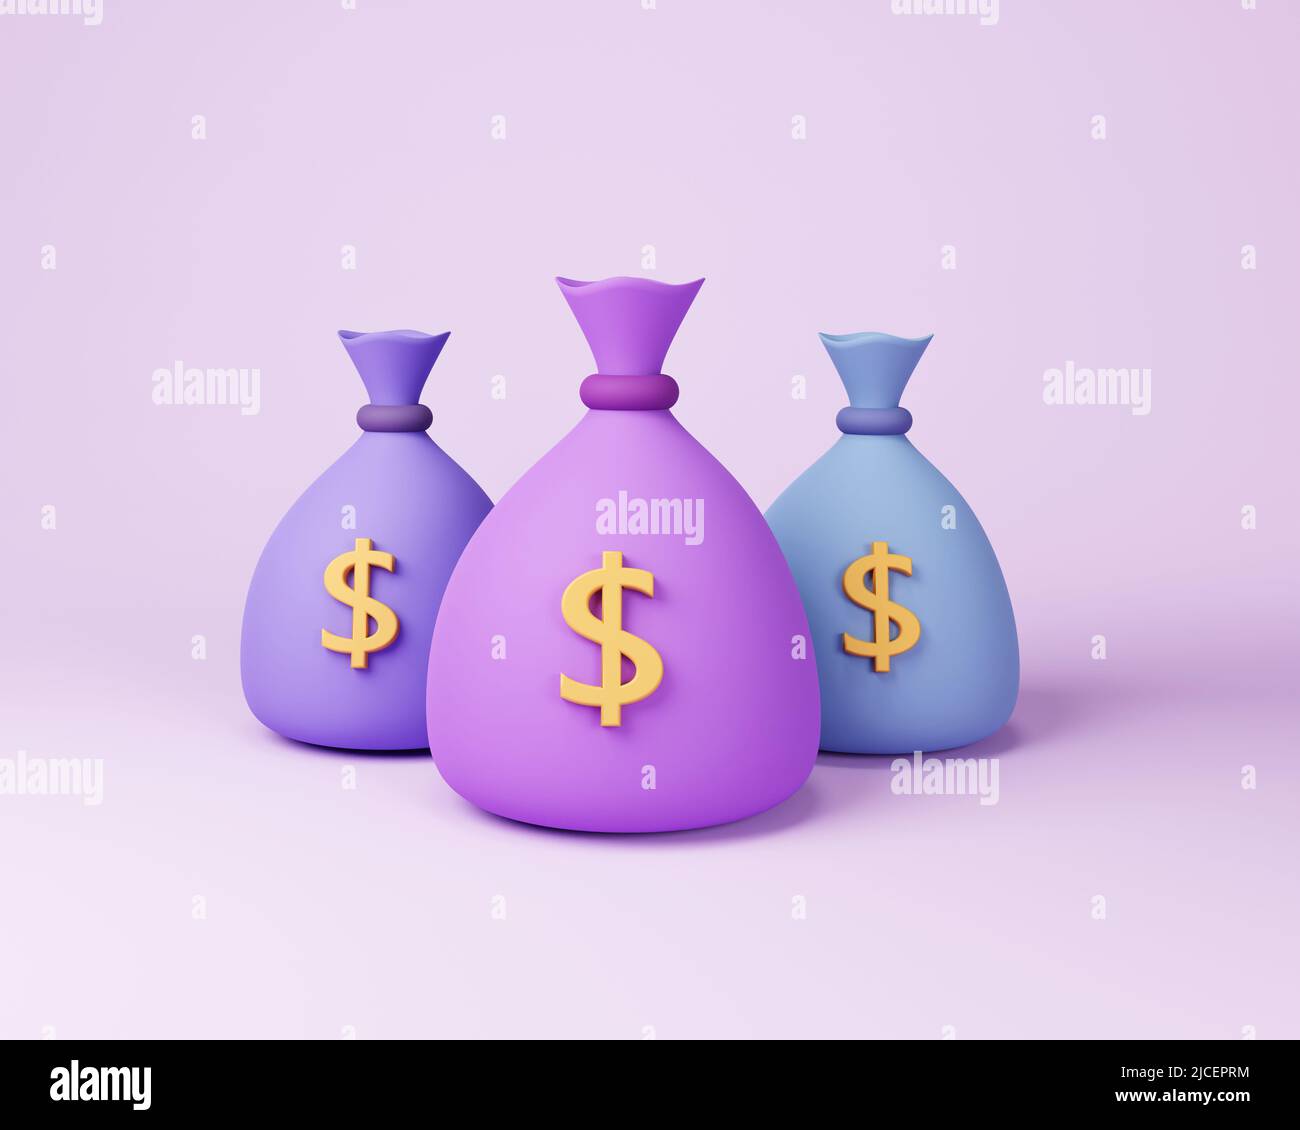 money bags icon, money saving concept. difference money bags on purple background Stock Photo